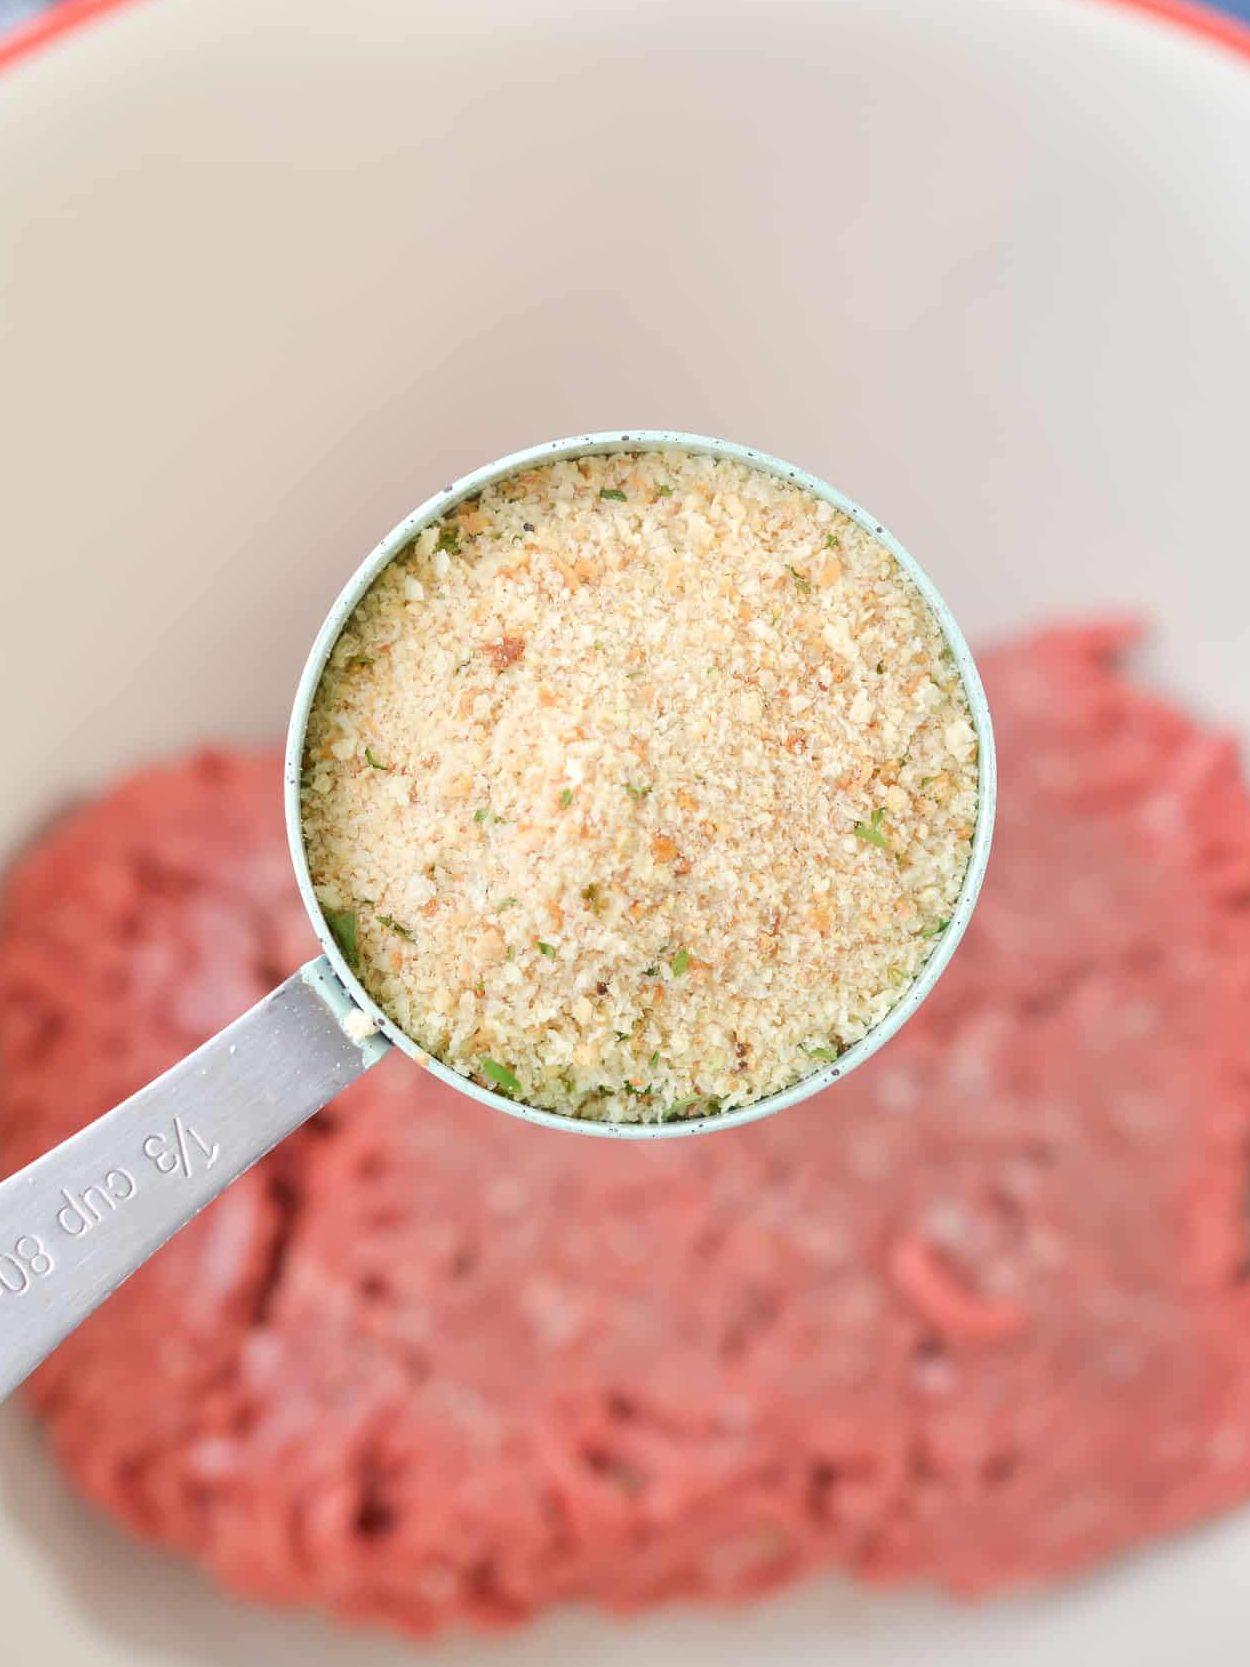 Adding lean ground beef and bread crumbs